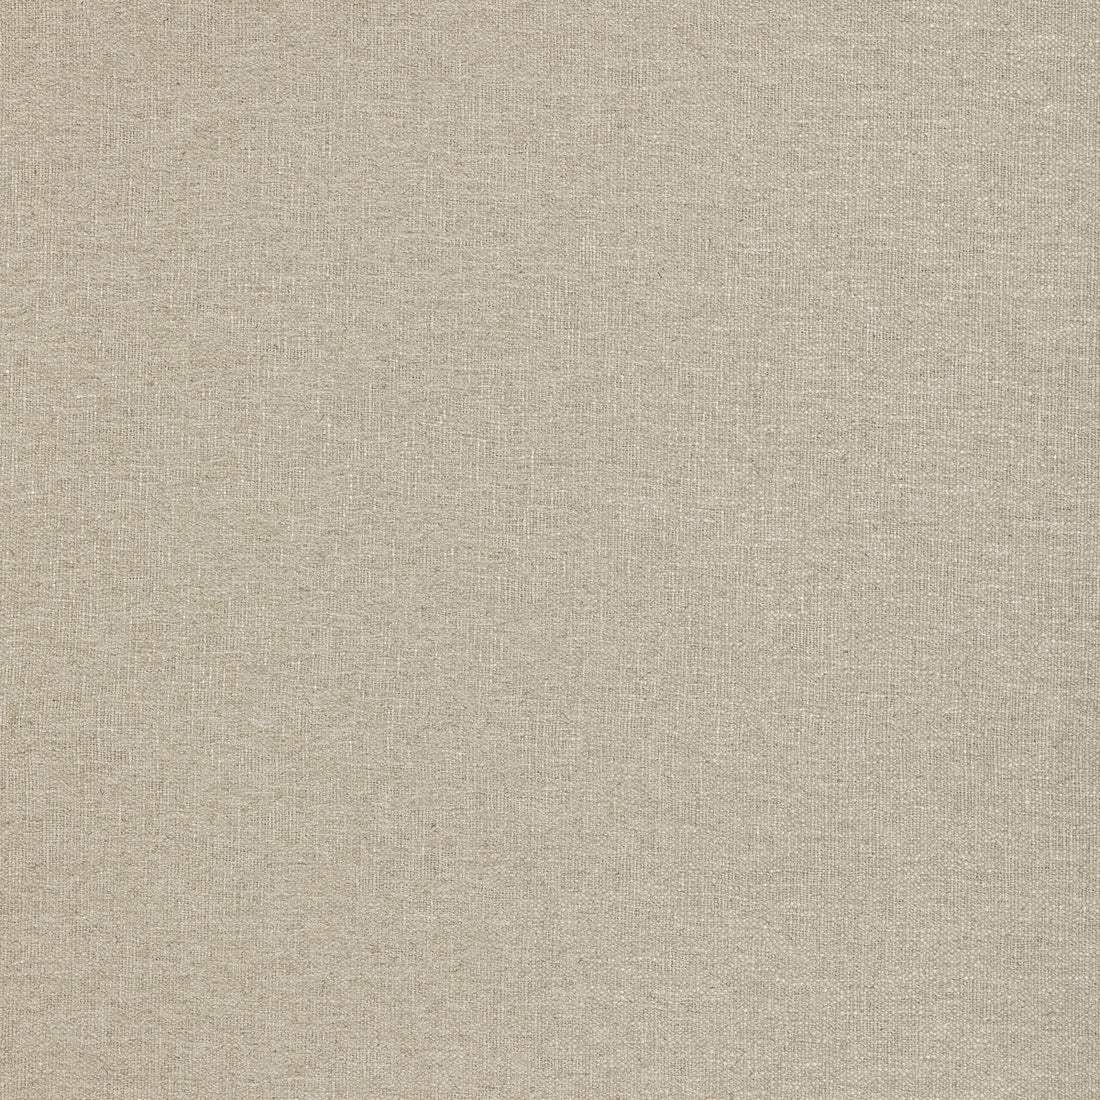 Steppe fabric in linen color - pattern ED85395.110.0 - by Threads in the Quintessential Naturals collection